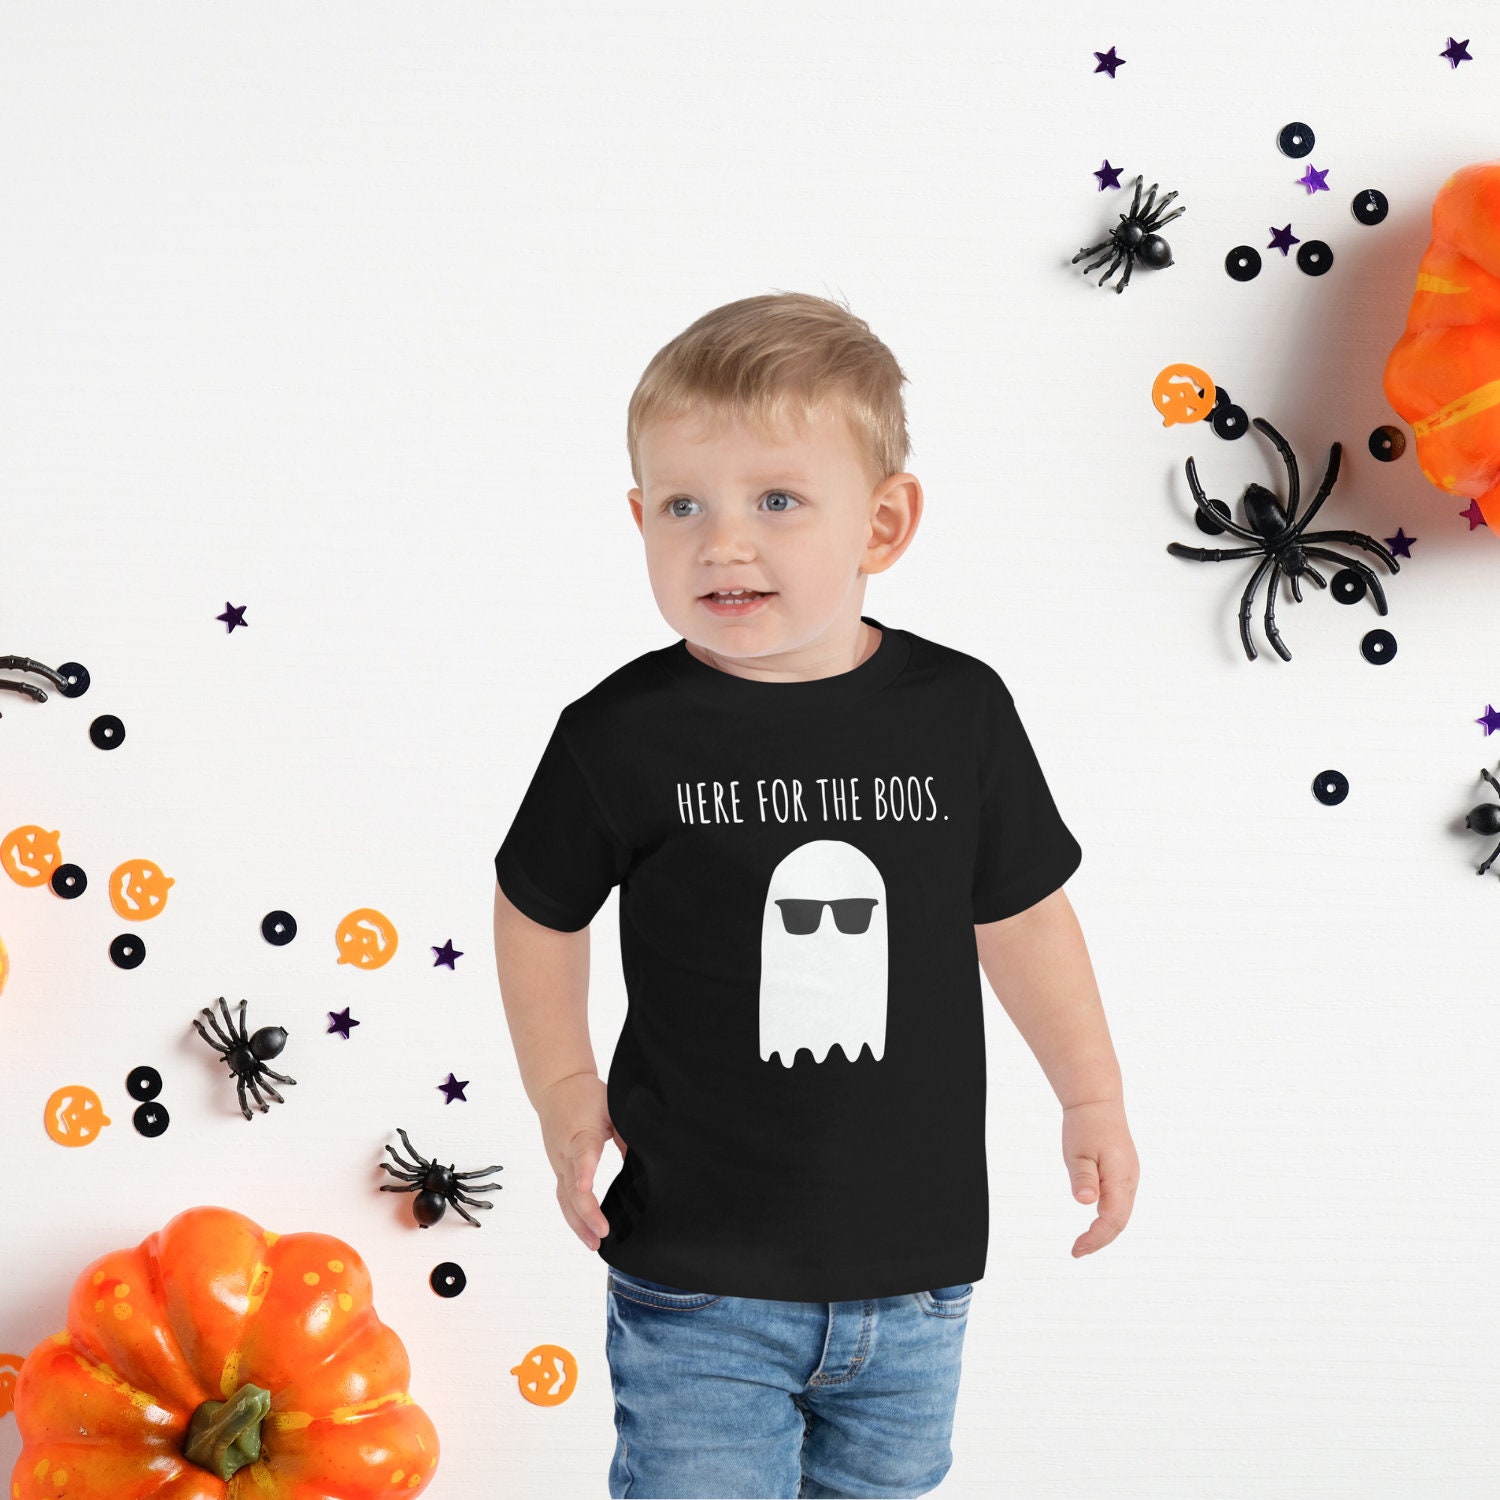 Discover Here for the Boos, Toddler T-shirt, Kids Funny Ghost Tee, Kids Halloween Tee, Kids Ghost T-Shirt